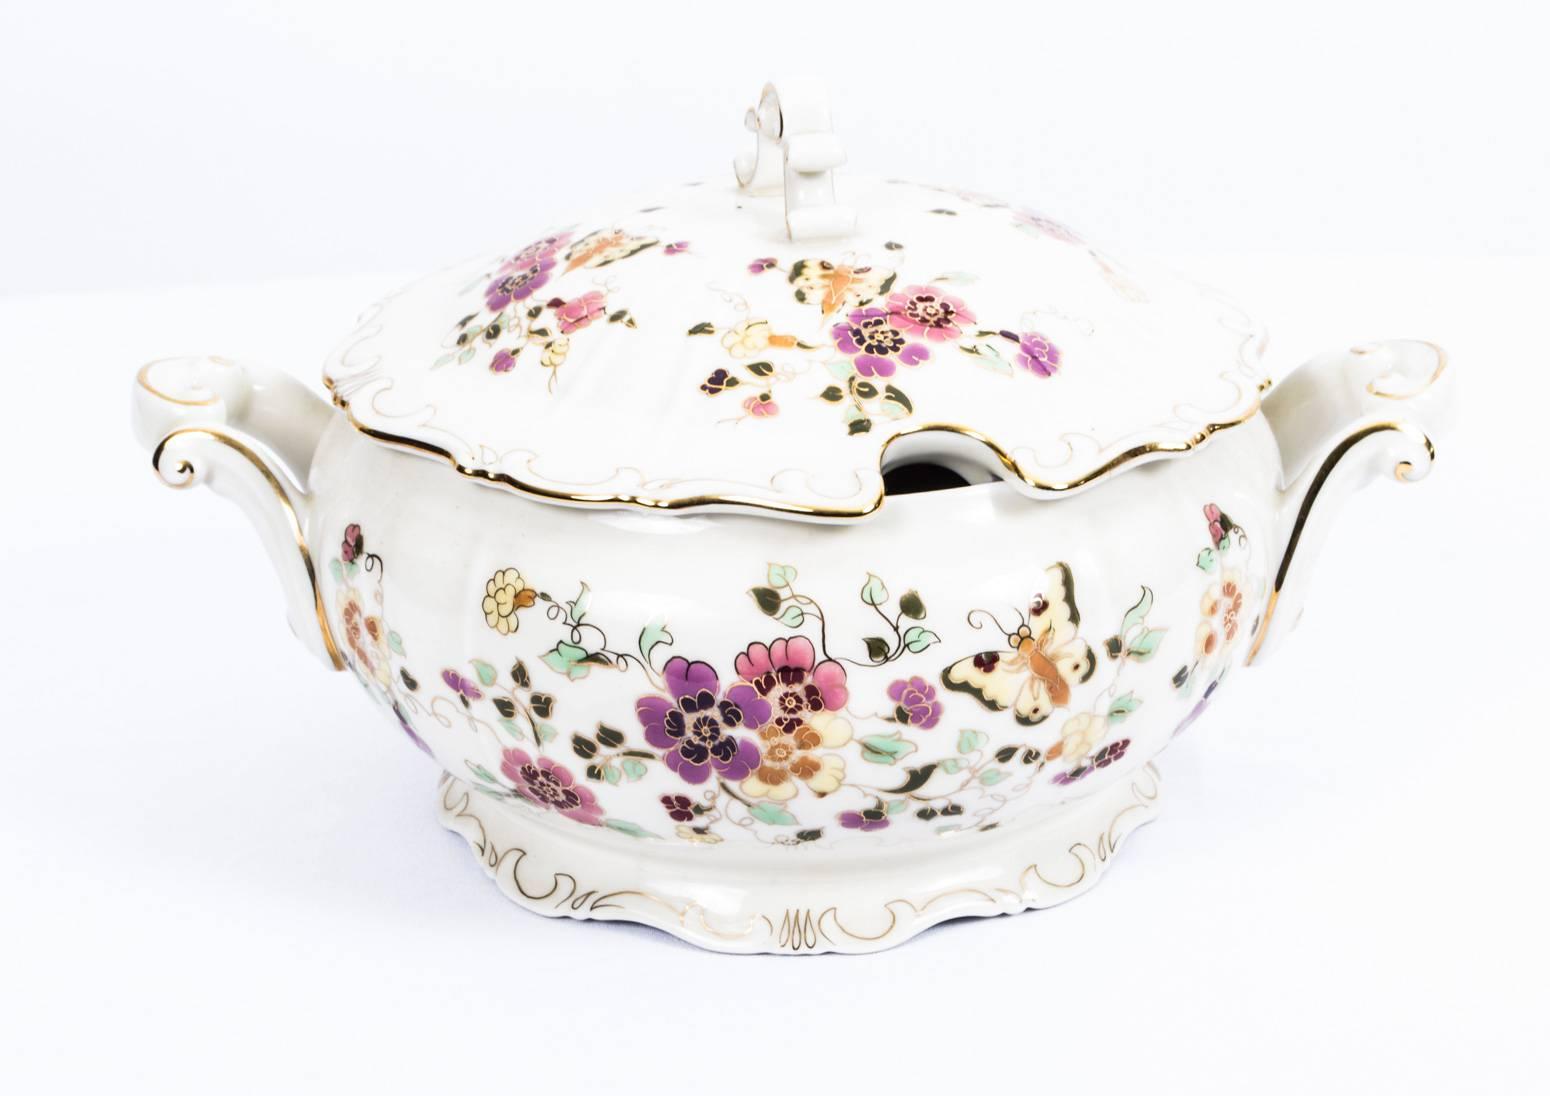 An extensive beautiful Zsolnay Porcelain dinner, tea and coffee service for eight, hand-painted with hellebores and butterflies, picked out in gilt throughout on a cream ground, circa 1930 in date.

Each piece is stamped 'Zsolnay HUNGARY